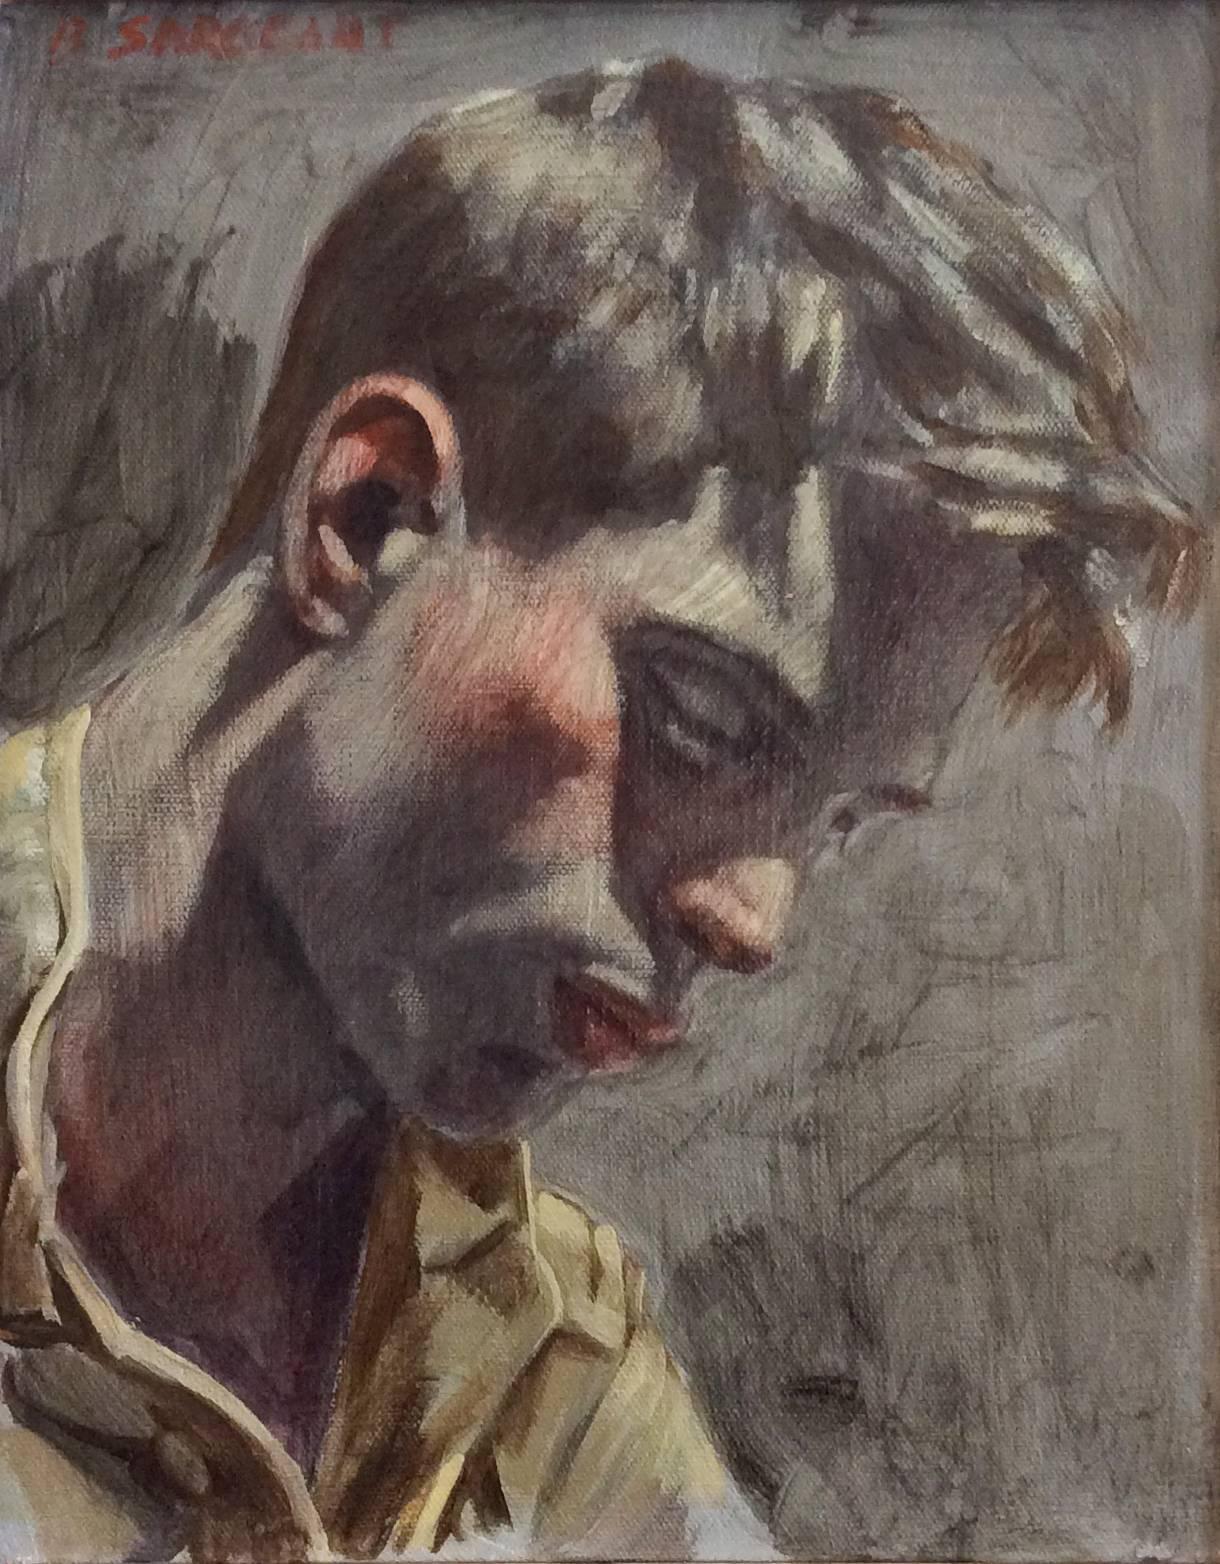 oil on canvas
14 x 11 inches 
18 x 15 inches in silver leaf wood frame

This vertical, contemporary portrait painting of single young male was made by Mark Beard under his fictitious artistic persona, Bruce Sargeant. Painted in a modern Academic